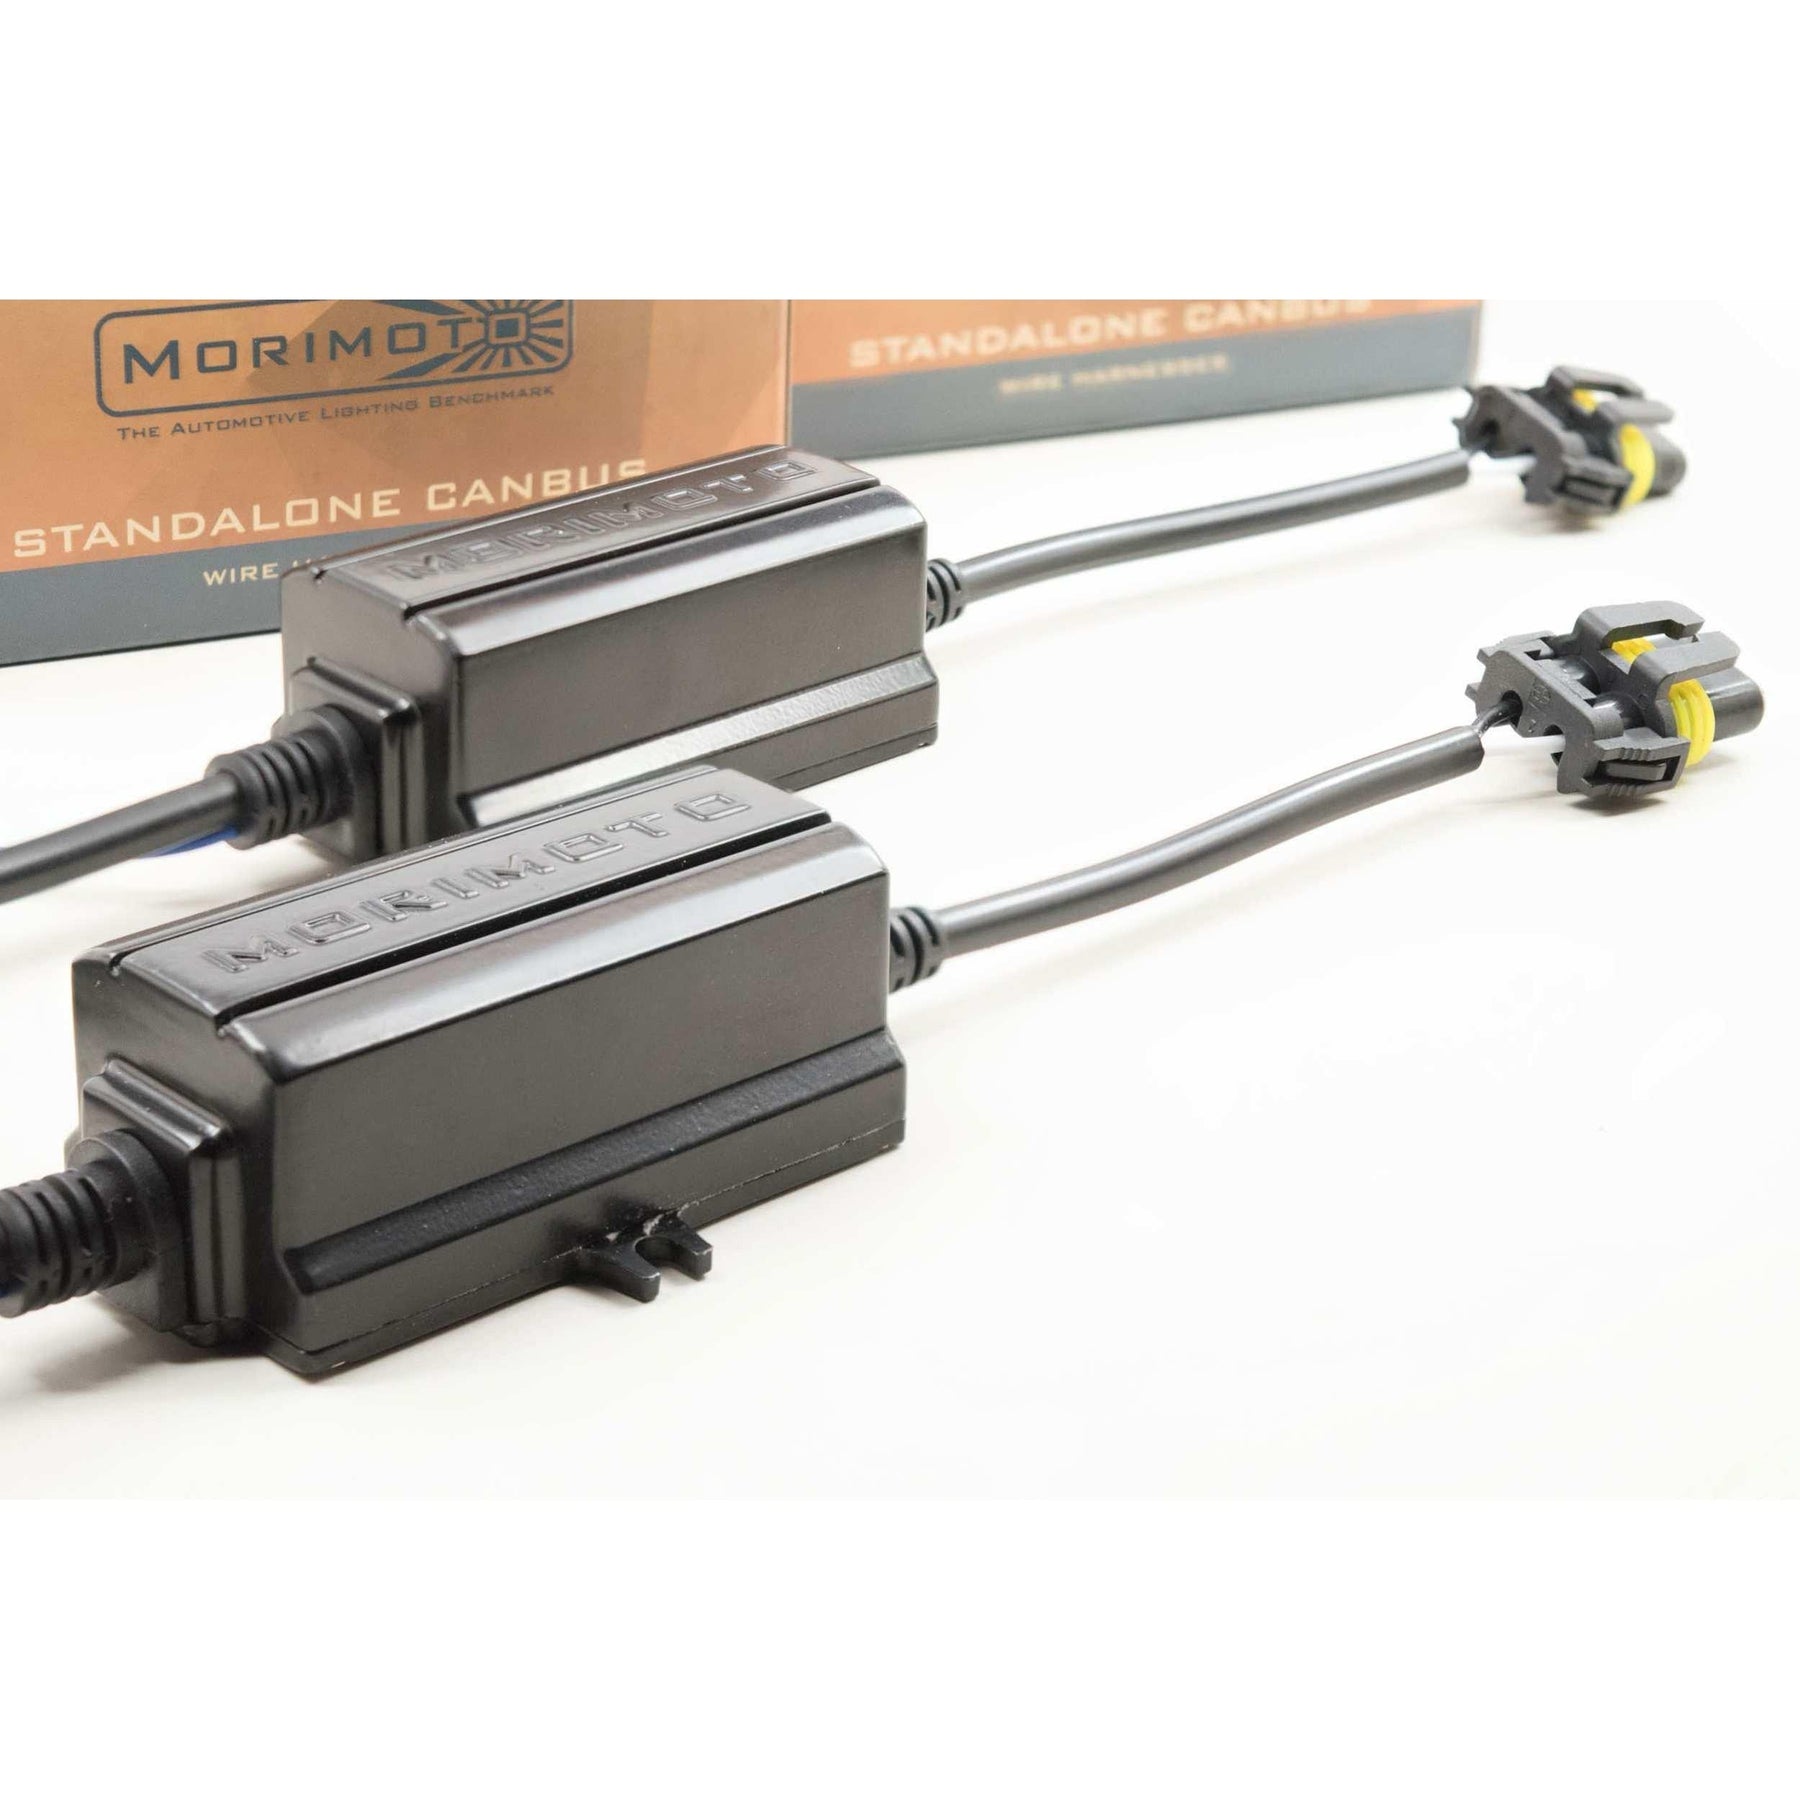 9005/9006 Standalone Canbus Harness (H191)-Lighting Harness-Morimoto-H191-Dirty Diesel Customs